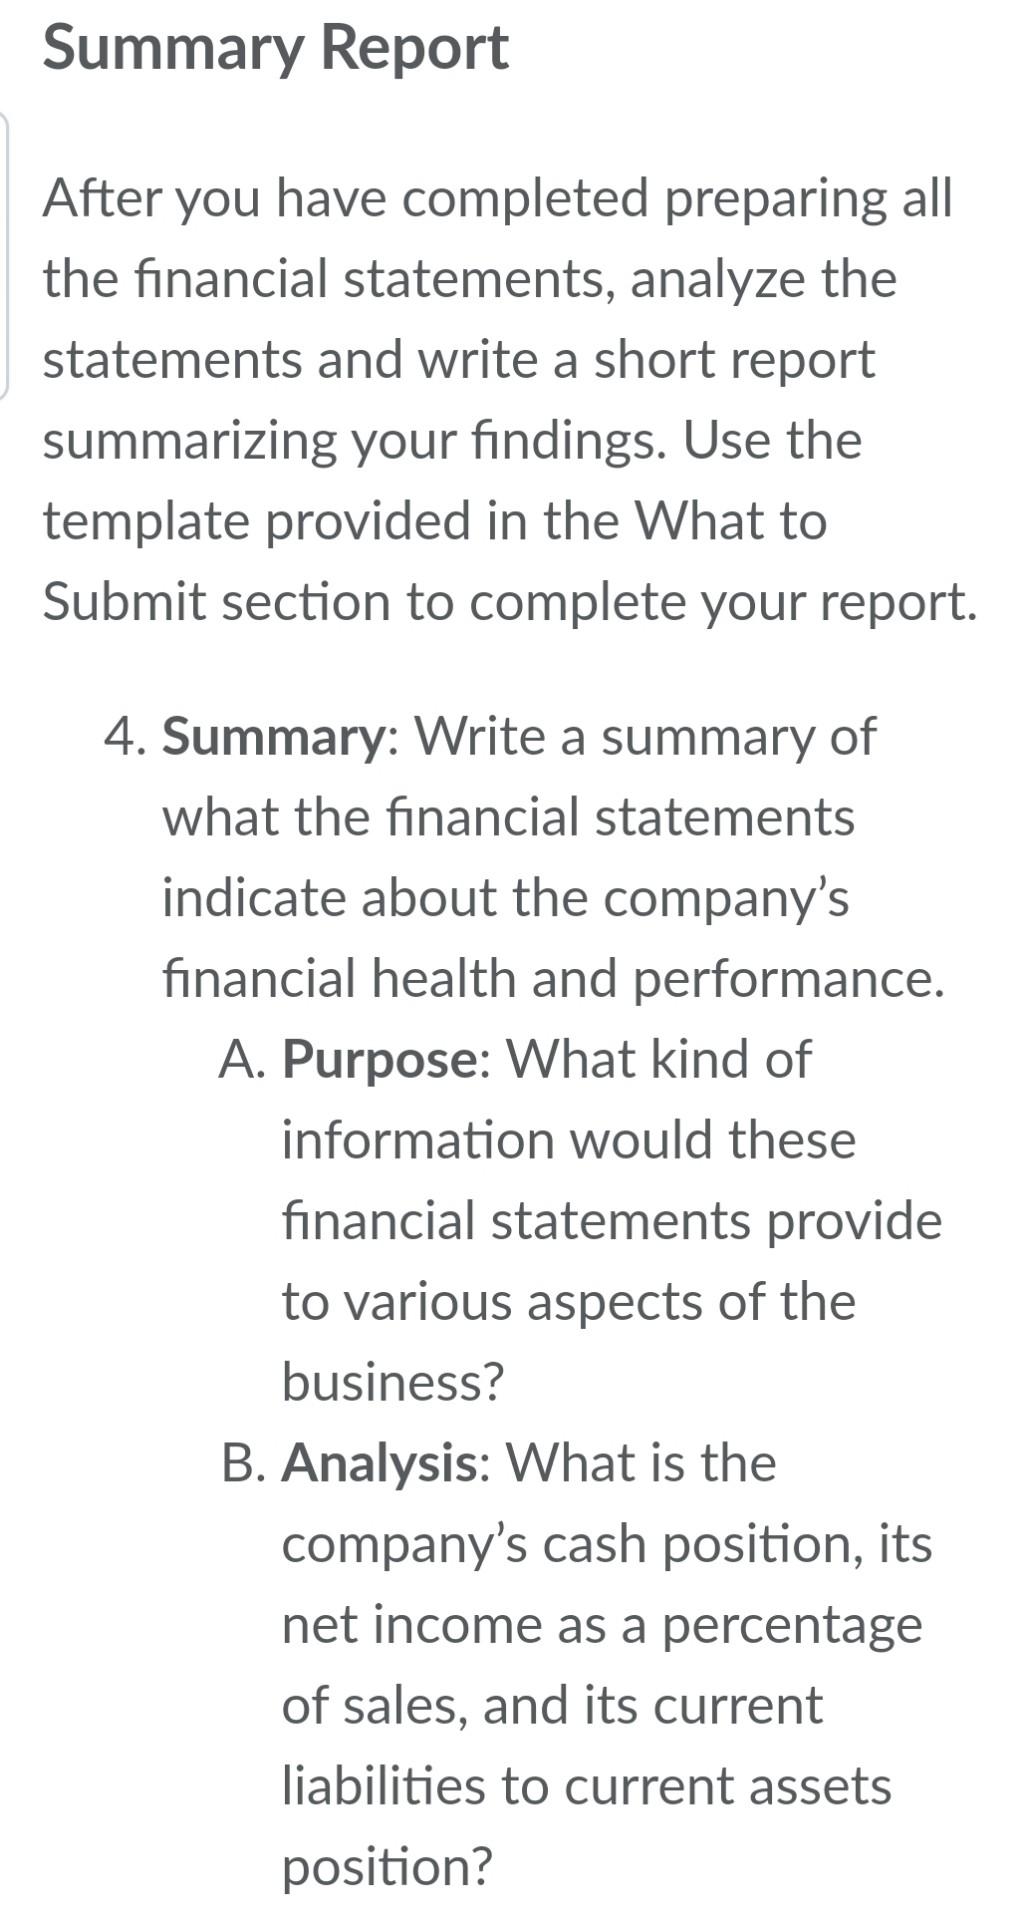 How to Write a Financial Report (with Pictures) - wikiHow